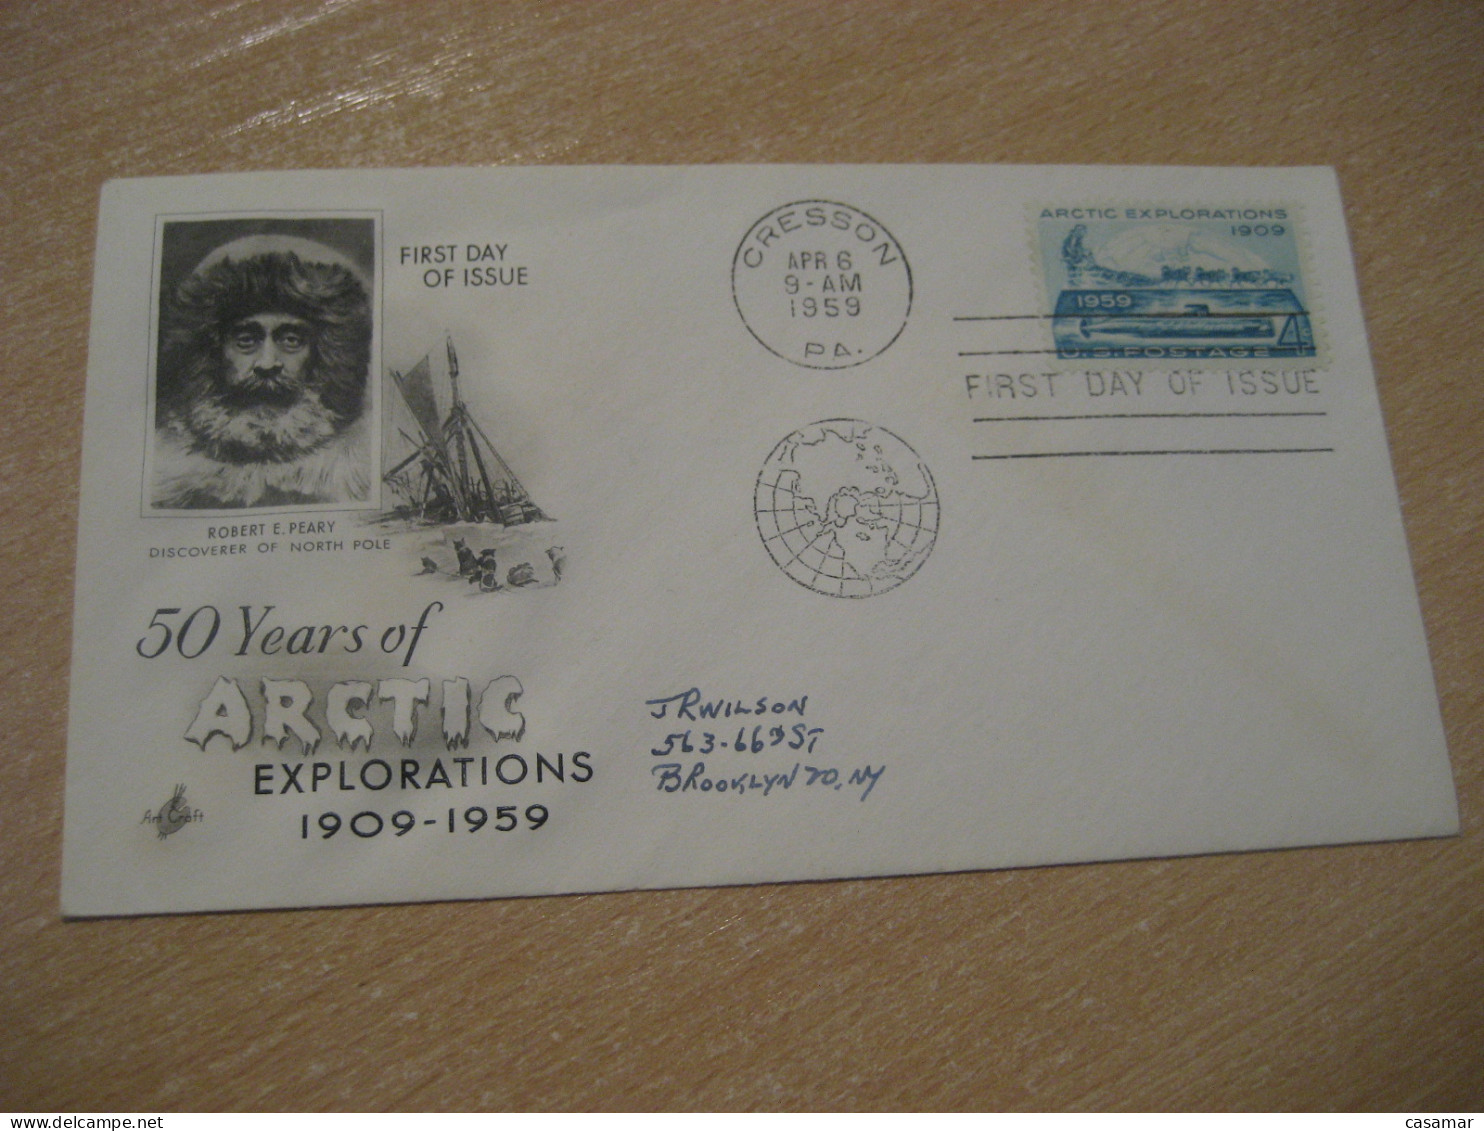 CRESSON 1959 Arctic Explorations Robert E Peary Discoverer North Pole Polar Arctic Submarine U-boot FDC Cancel Cover USA - Arctic Expeditions